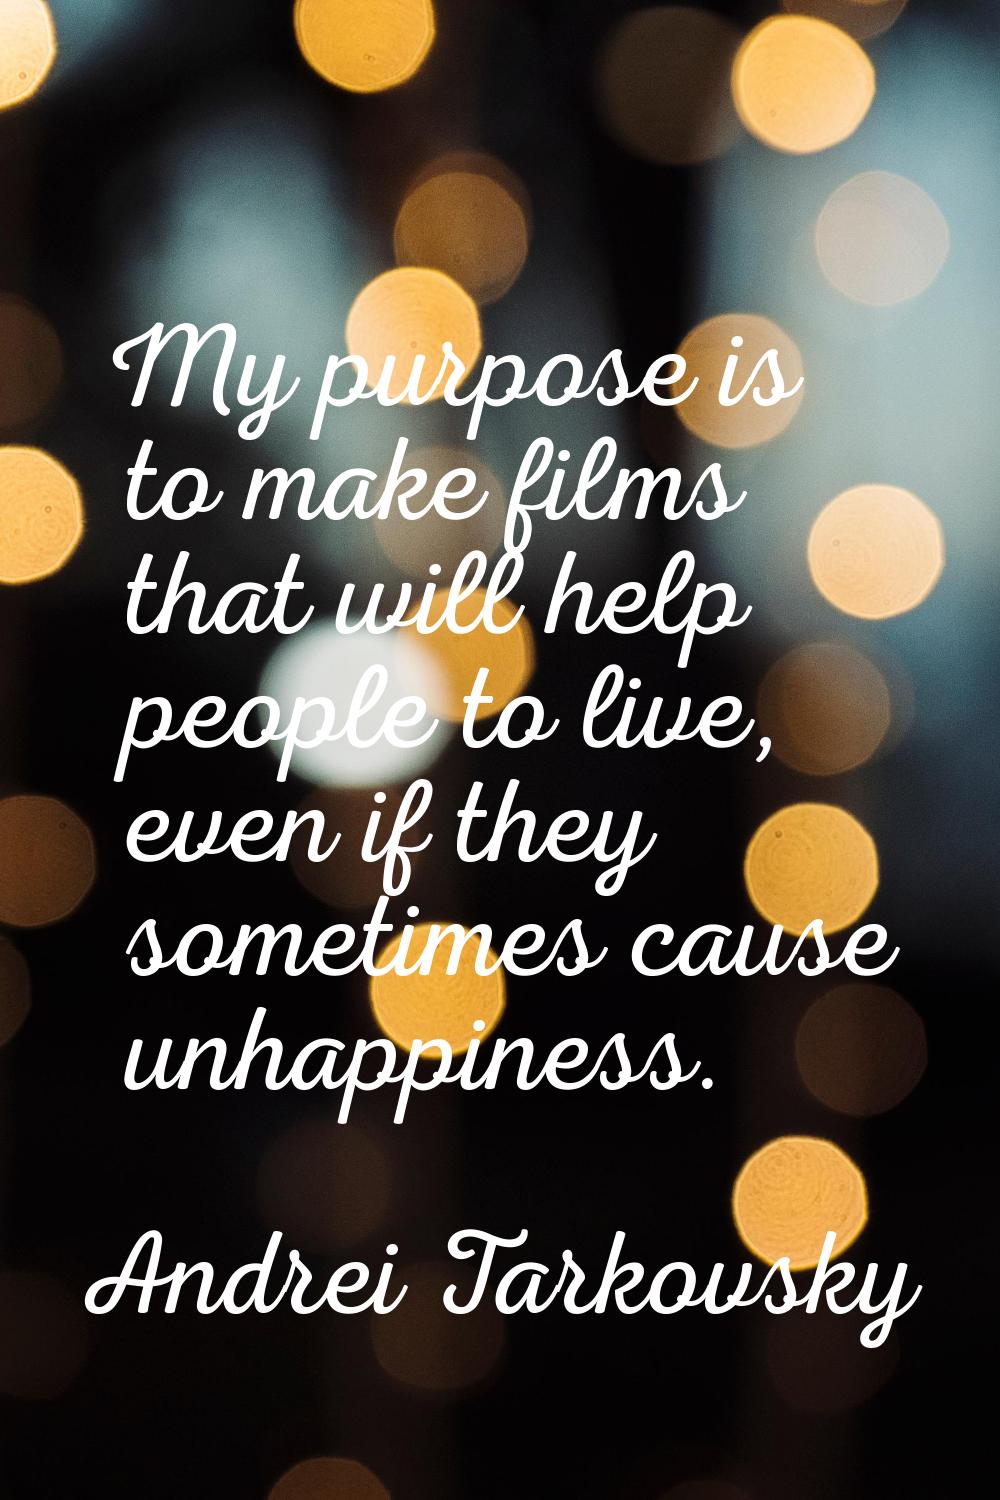 My purpose is to make films that will help people to live, even if they sometimes cause unhappiness